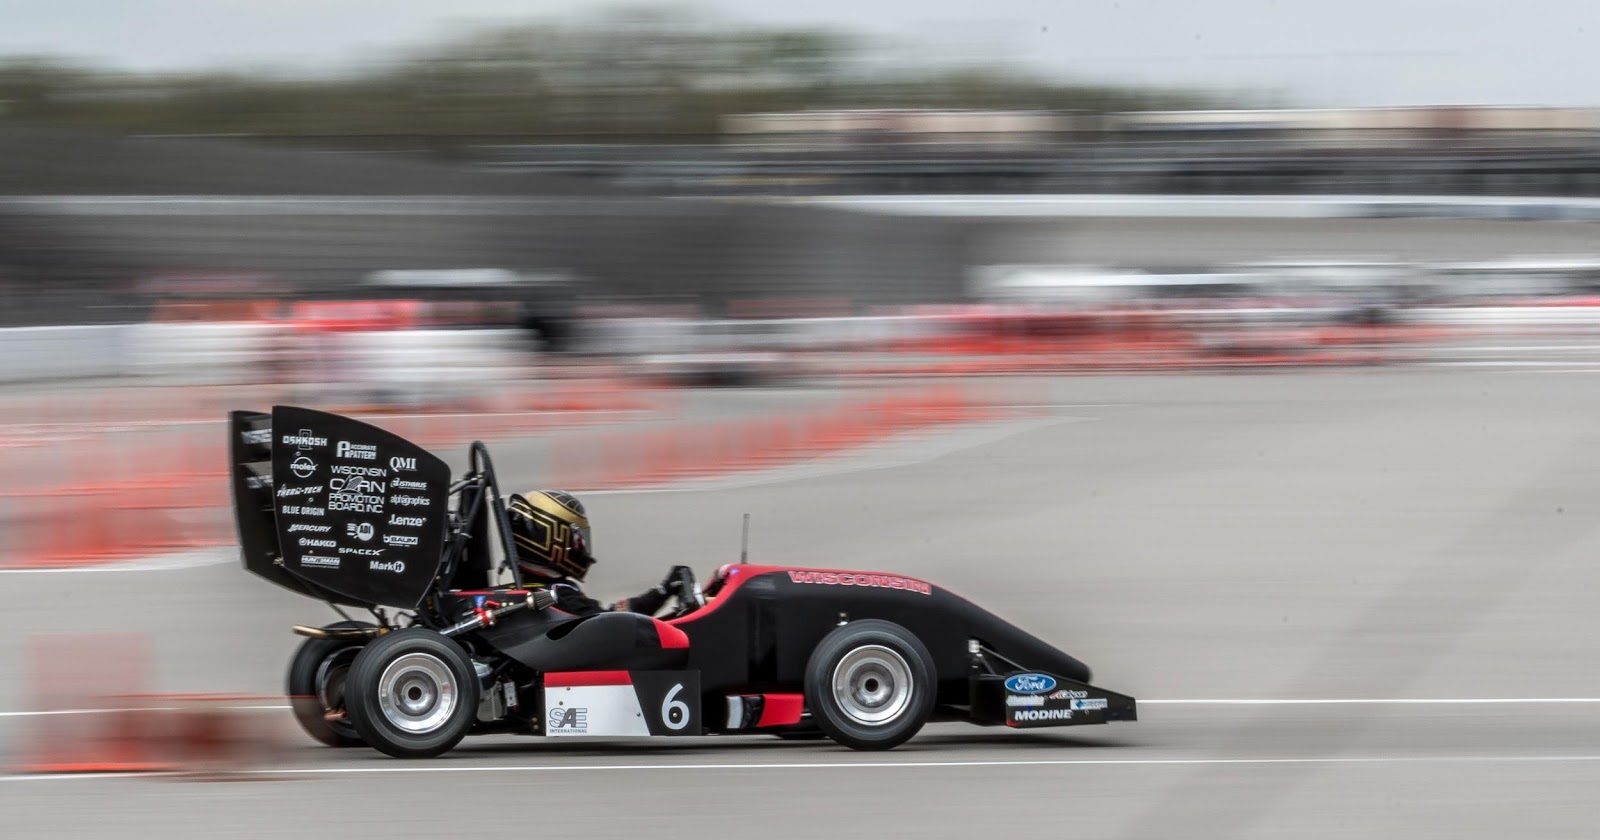 A revolutionary change with our third-generation monocoque, redesigned aerodynamic package and vehicle kinematics, and all-new Yamaha powertrain powered us to a 10th place finish at FSAE Michigan.